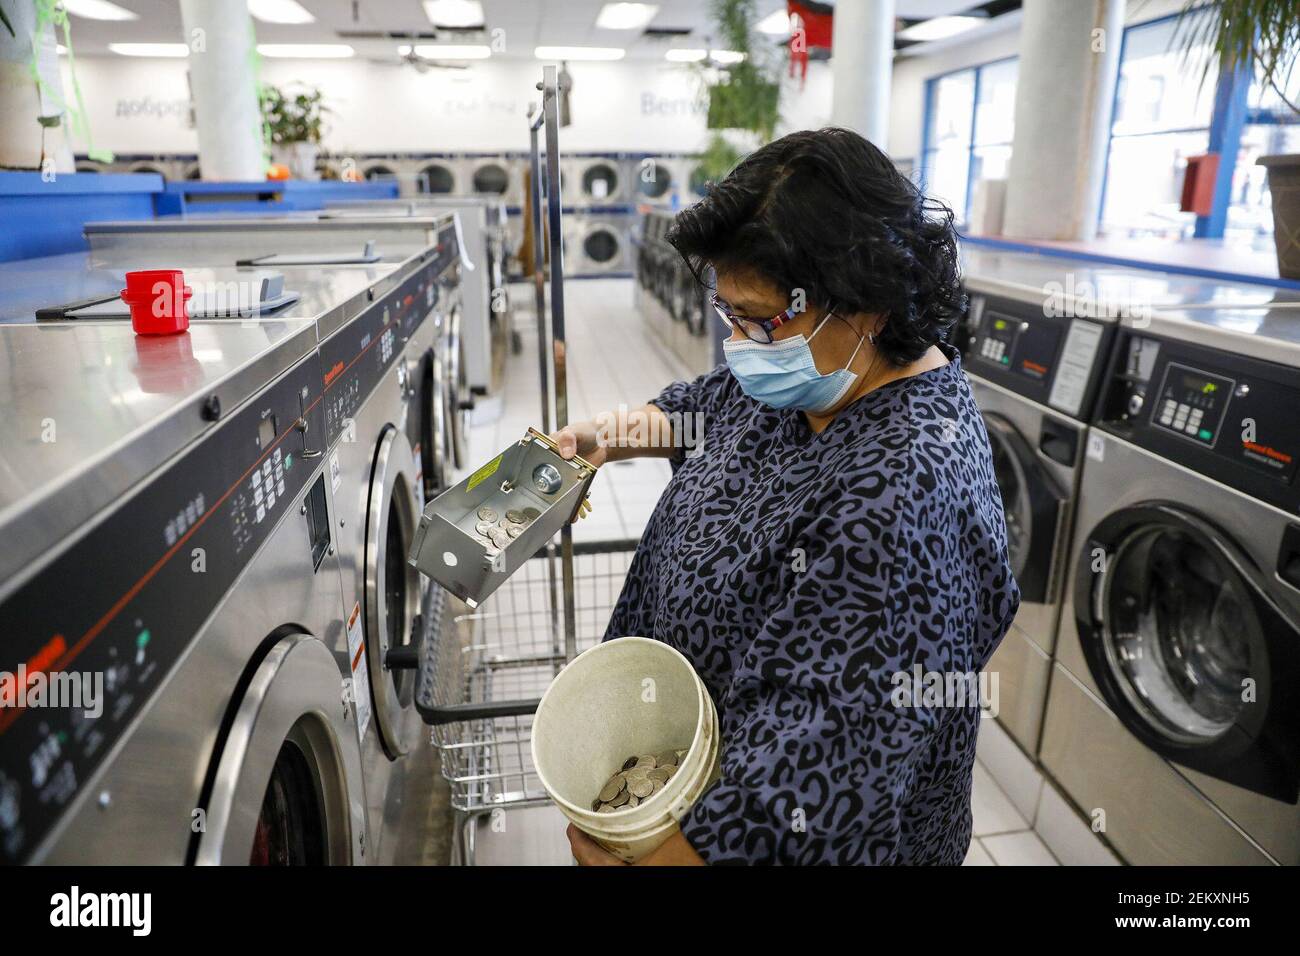 Laura Greco, a store leader, collects quarters from the washing